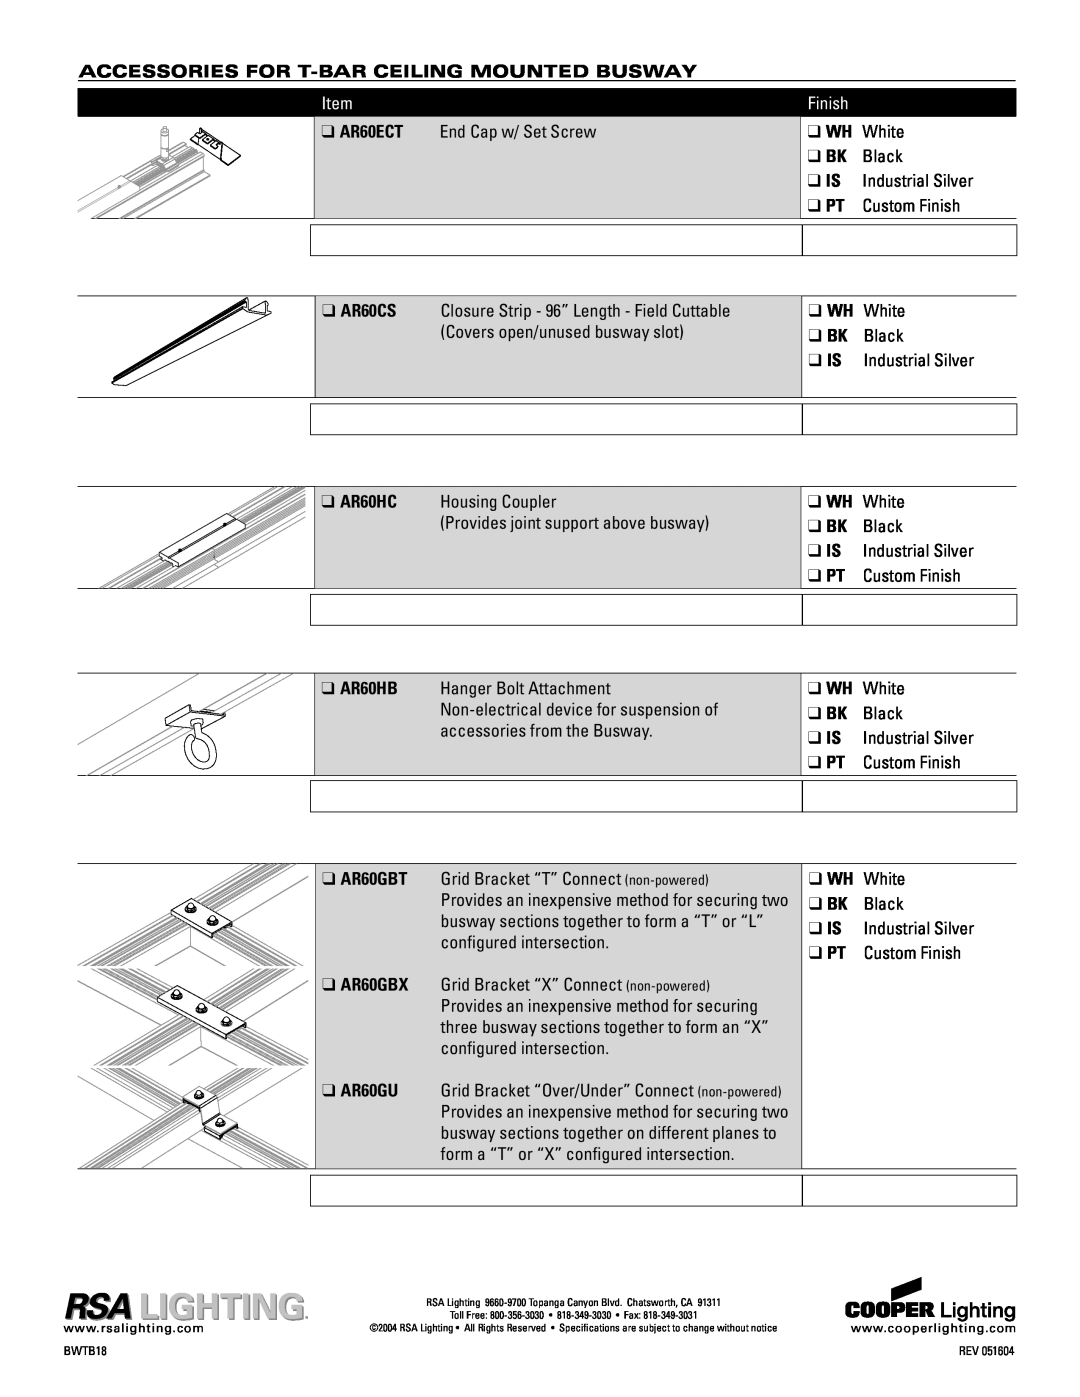 Cooper Lighting AR60T Accessories For T-Barceiling Mounted Busway, Finish, AR60ECT, End Cap w/ Set Screw, WH White, Black 